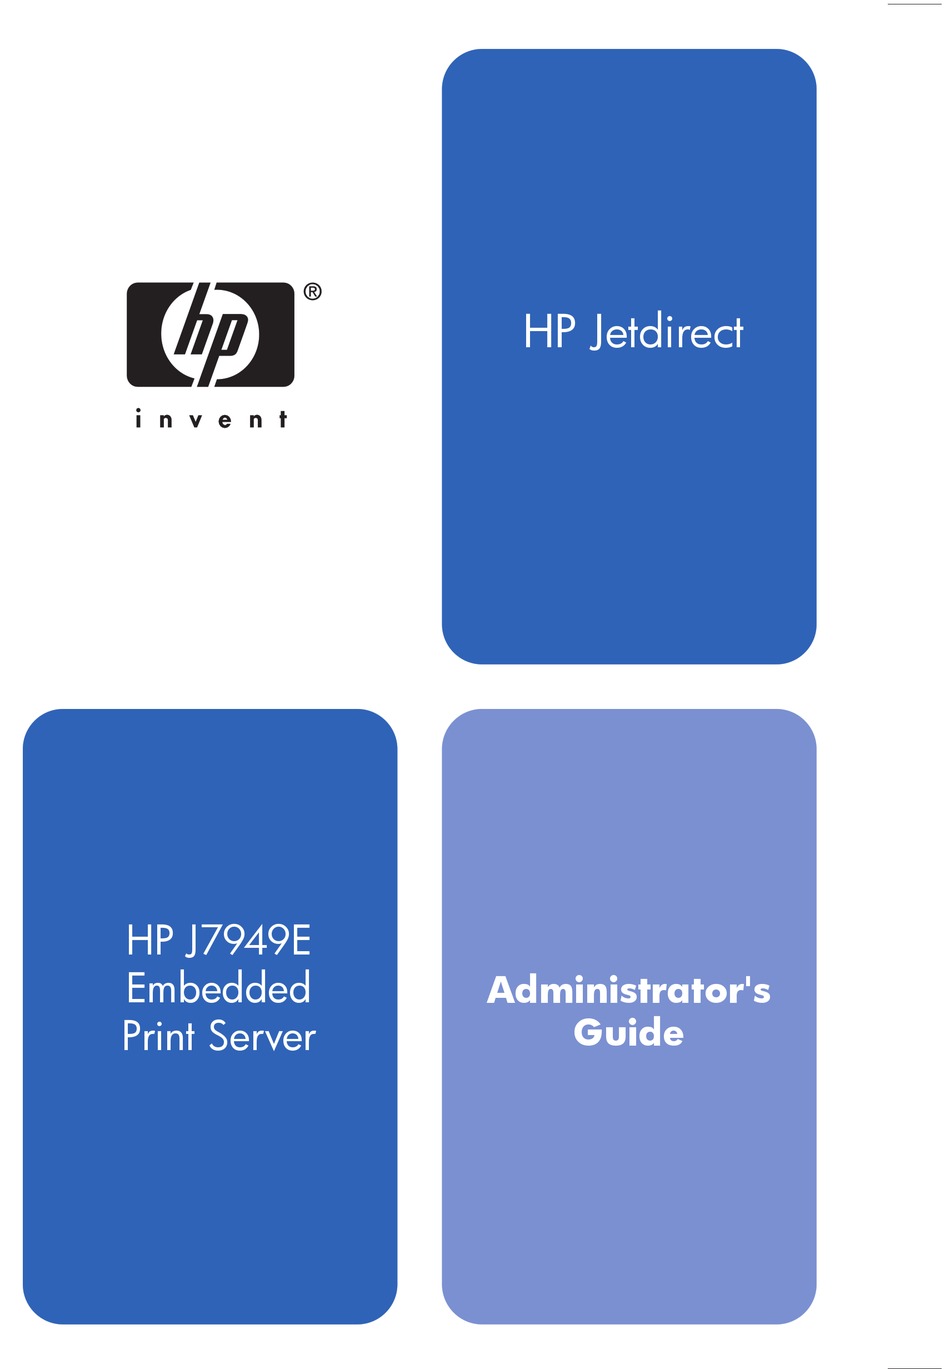 hp jetdirect 170x web interface issues